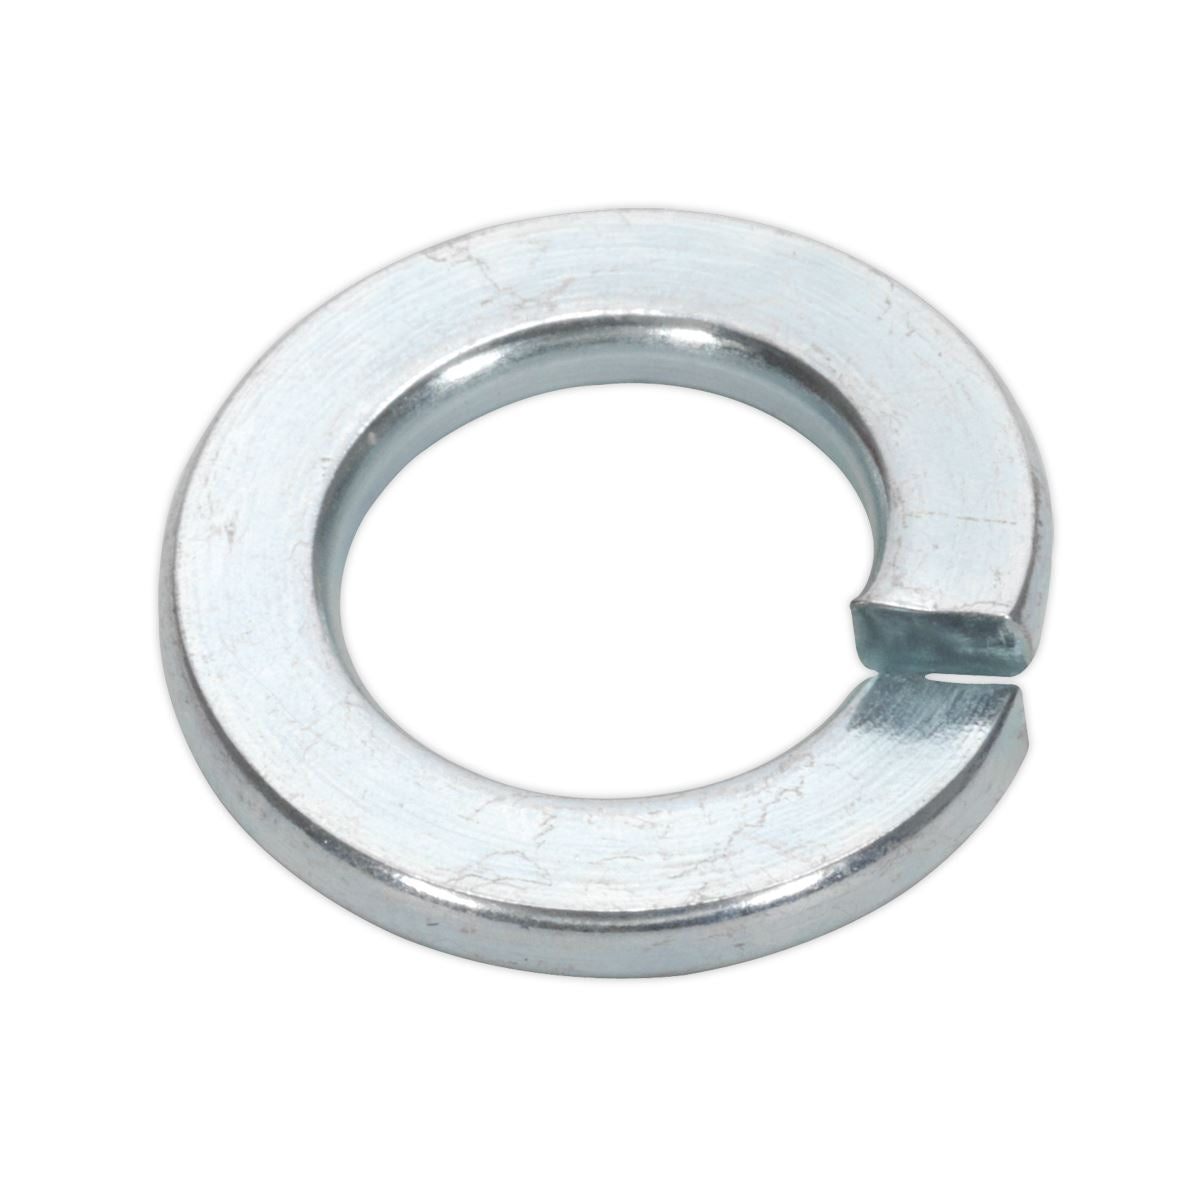 Sealey Spring Washer DIN 127B M10 Zinc Pack of 50